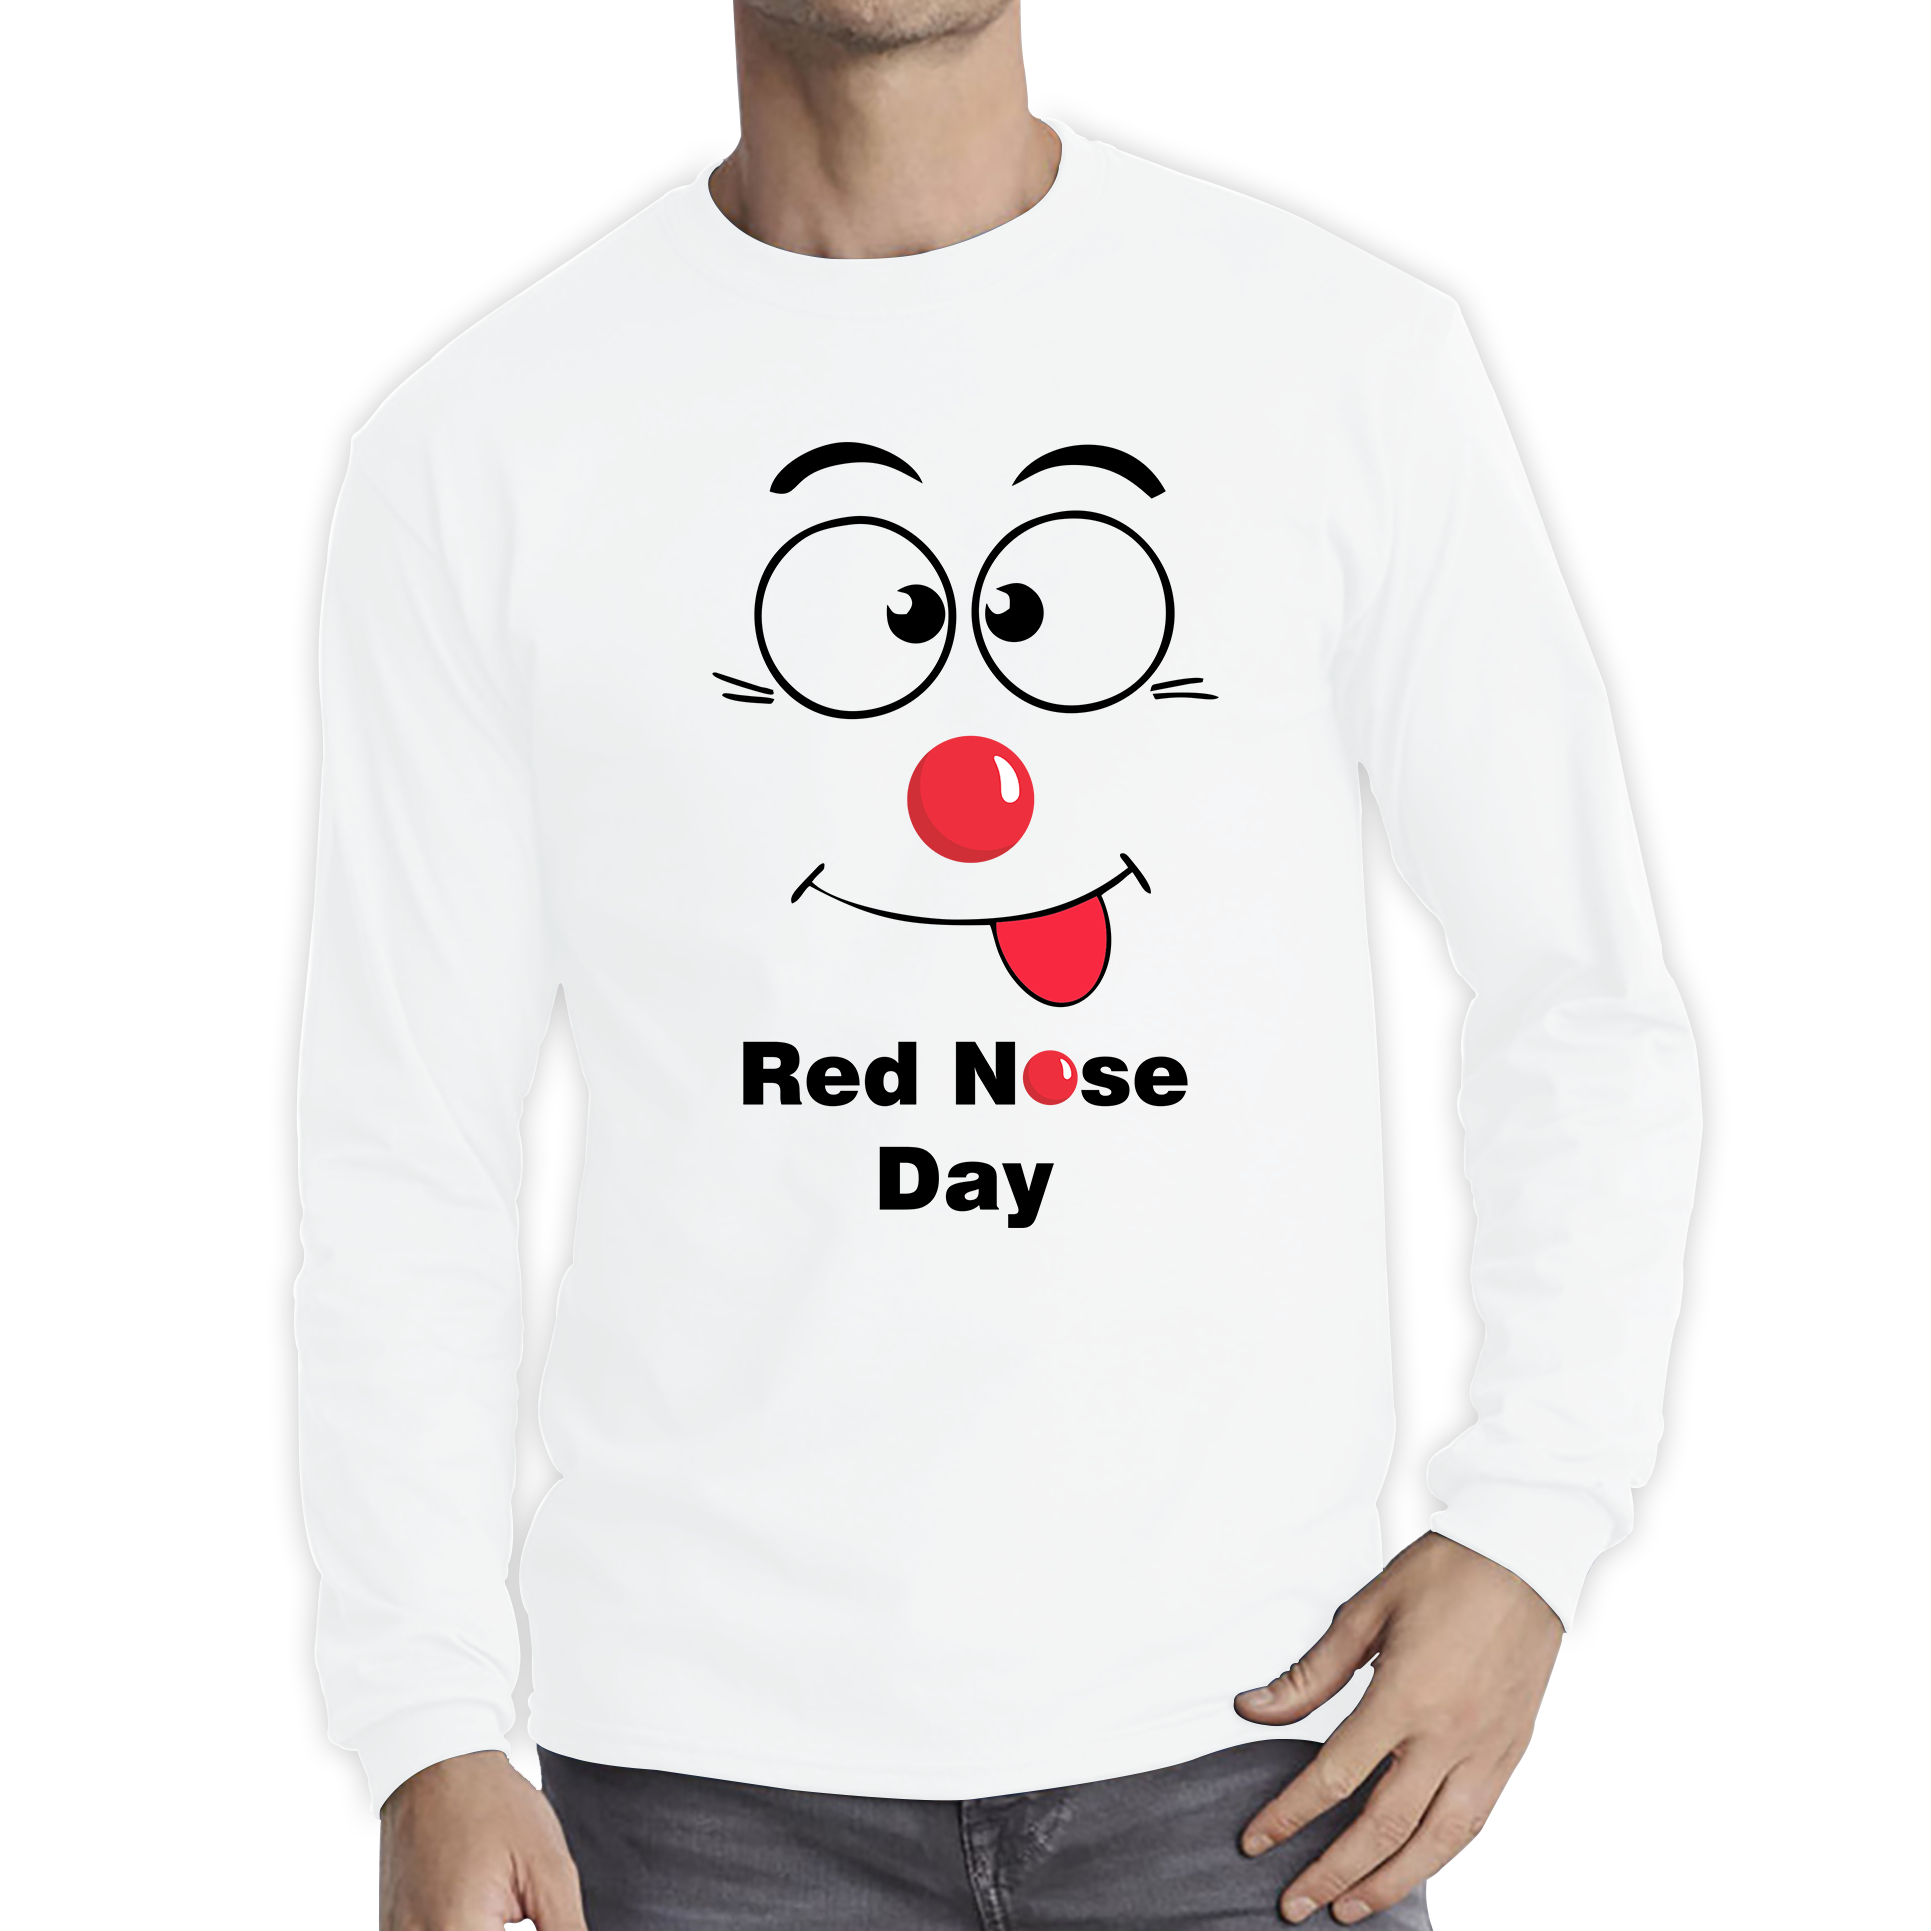 Funny Emoji Face Red Nose Day Adult Long Sleeve T Shirt. 50% Goes To Charity